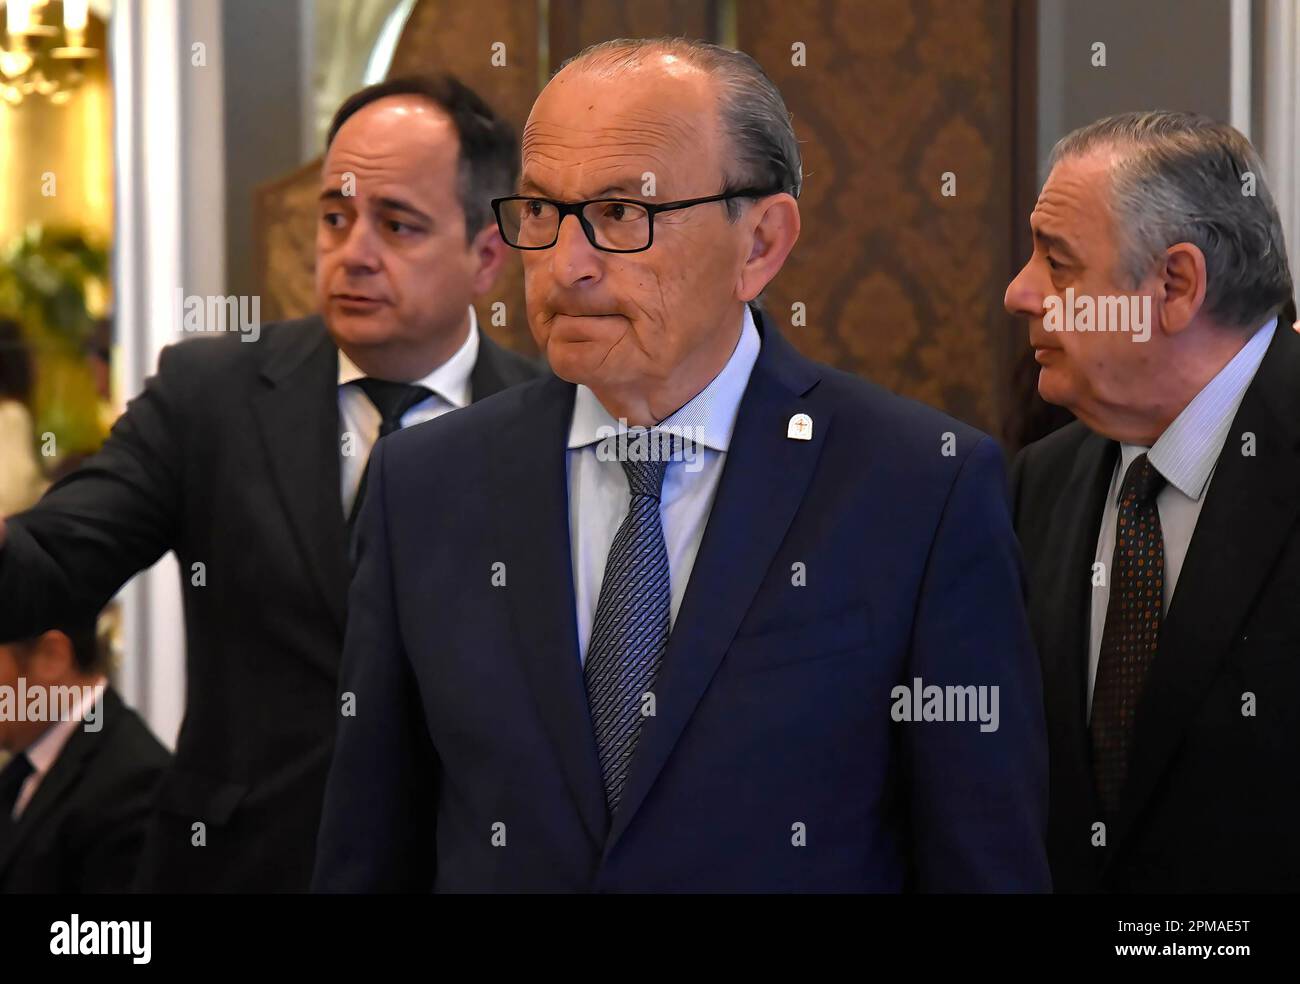 Madrid, Spain. 12th Apr, 2023. The Minister of tourism of the Government of Cantabria, Francisco Javier López Marcano, arrives at the Ritz Hotel during the presentation. The president of Cantabria, together with colleagues from the Cantabrian Regionalist Party, presented his candidacy for re-election in Madrid. (Photo by Richard Zubelzu/SOPA Images/Sipa USA) Credit: Sipa USA/Alamy Live News Stock Photo